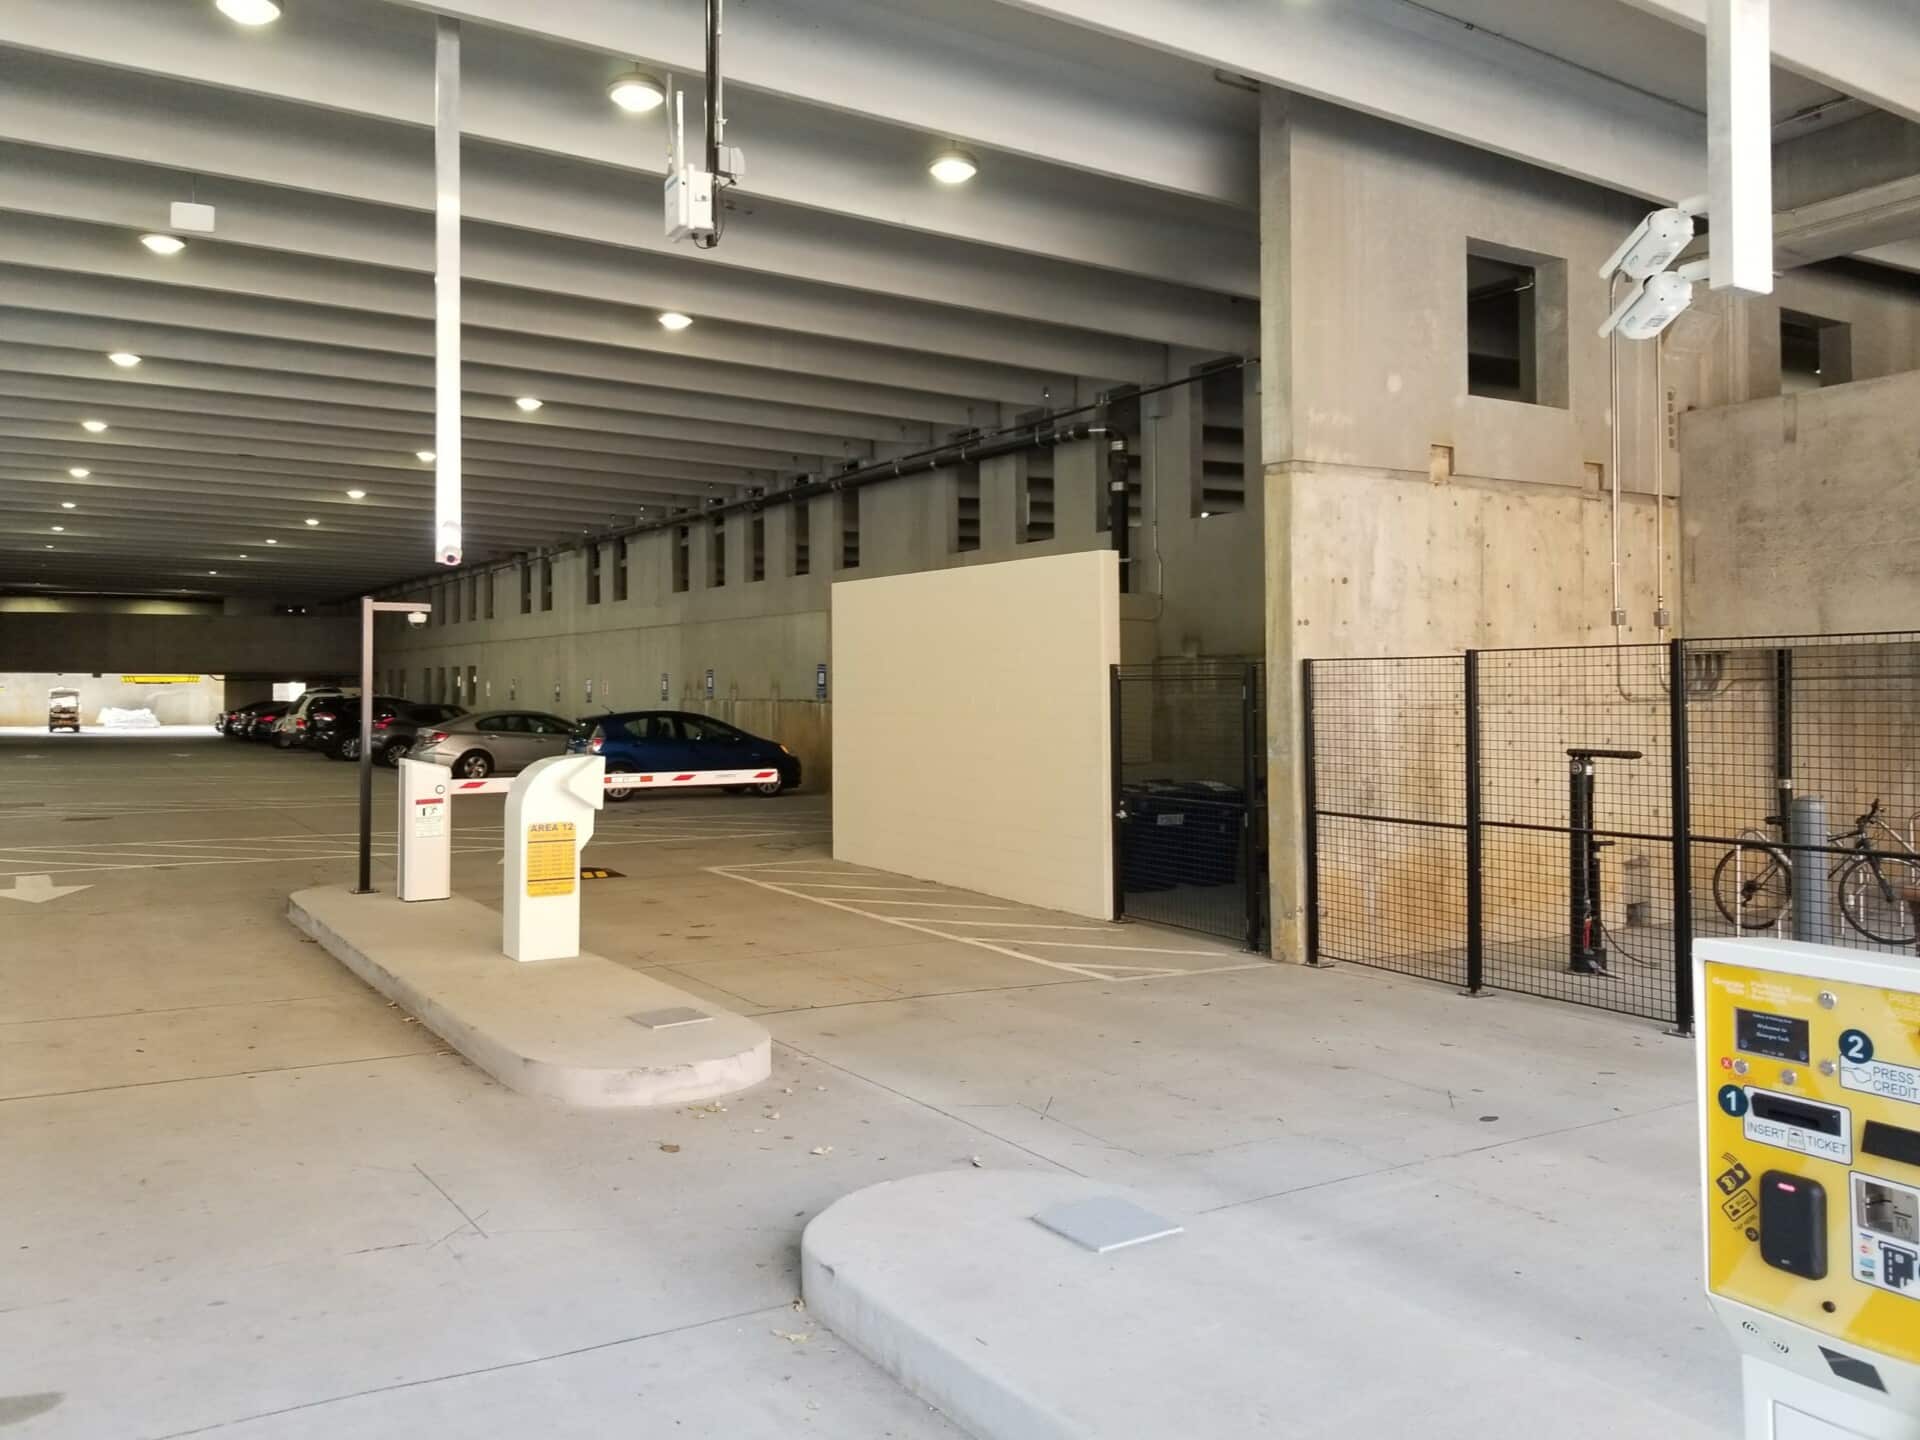 Security cameras monitor entrance and exit of secure parking area.